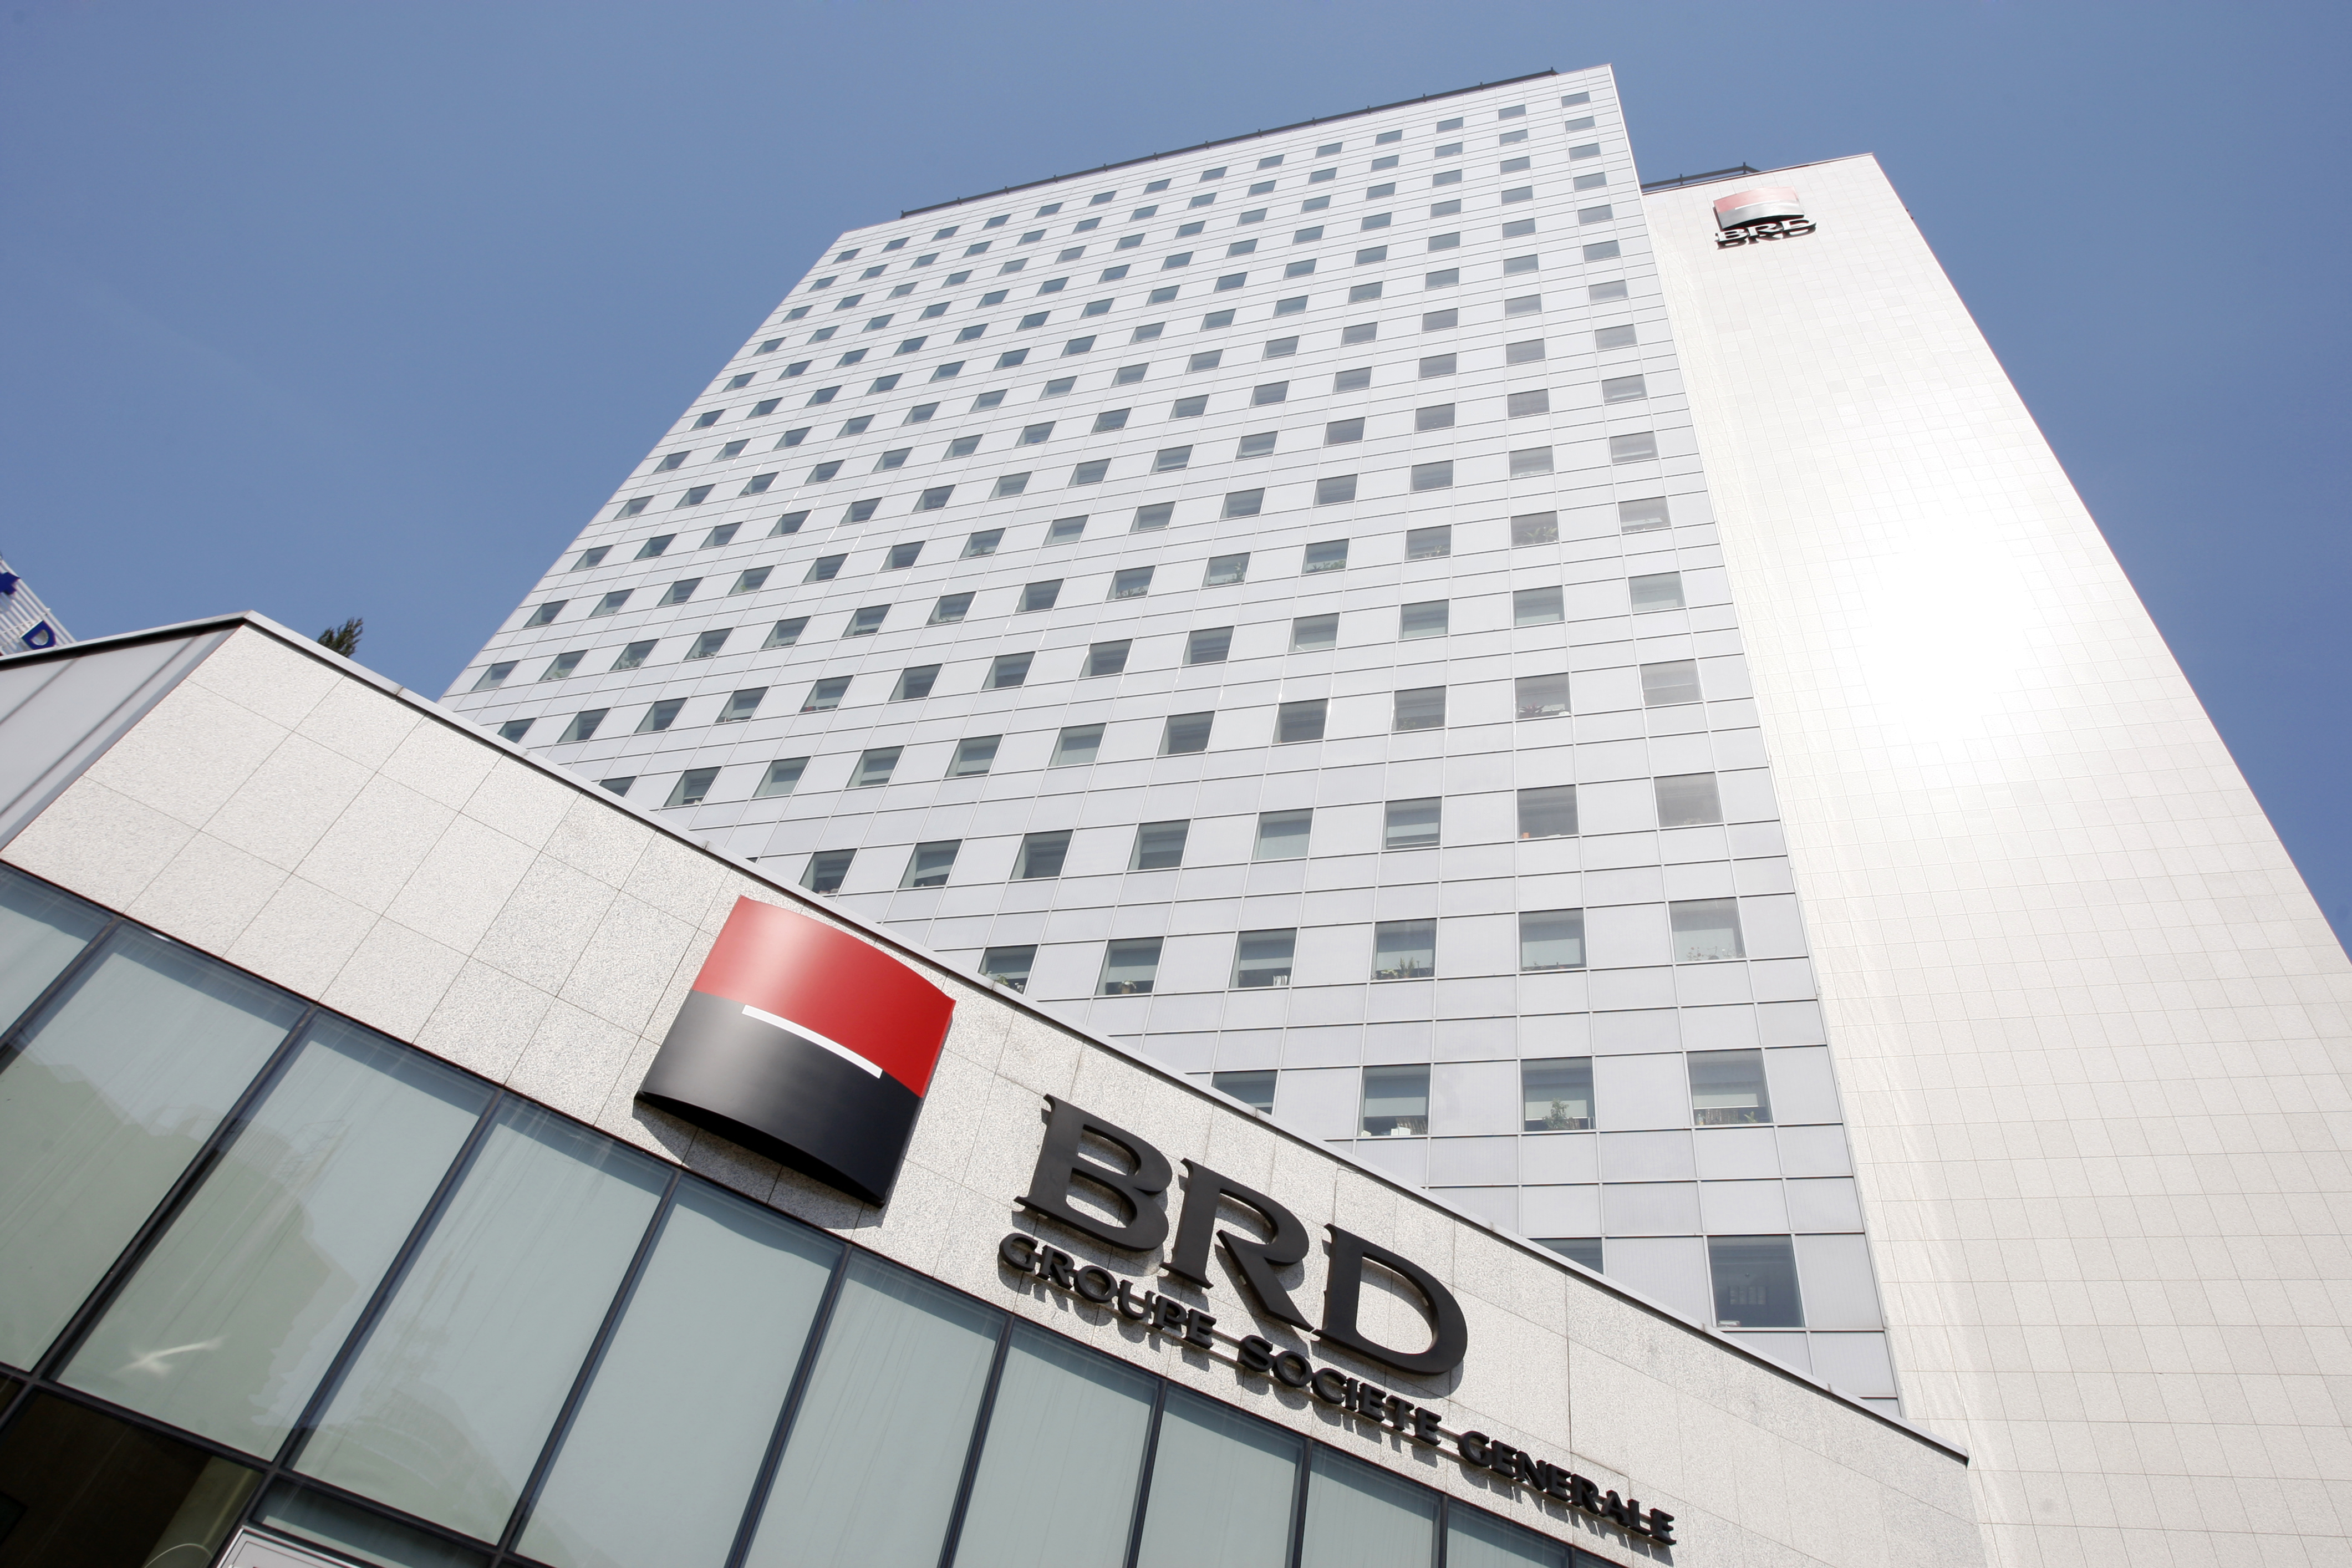 Romania’s leading financial group Banca Transilvania reportedly takes over BRD Pensii